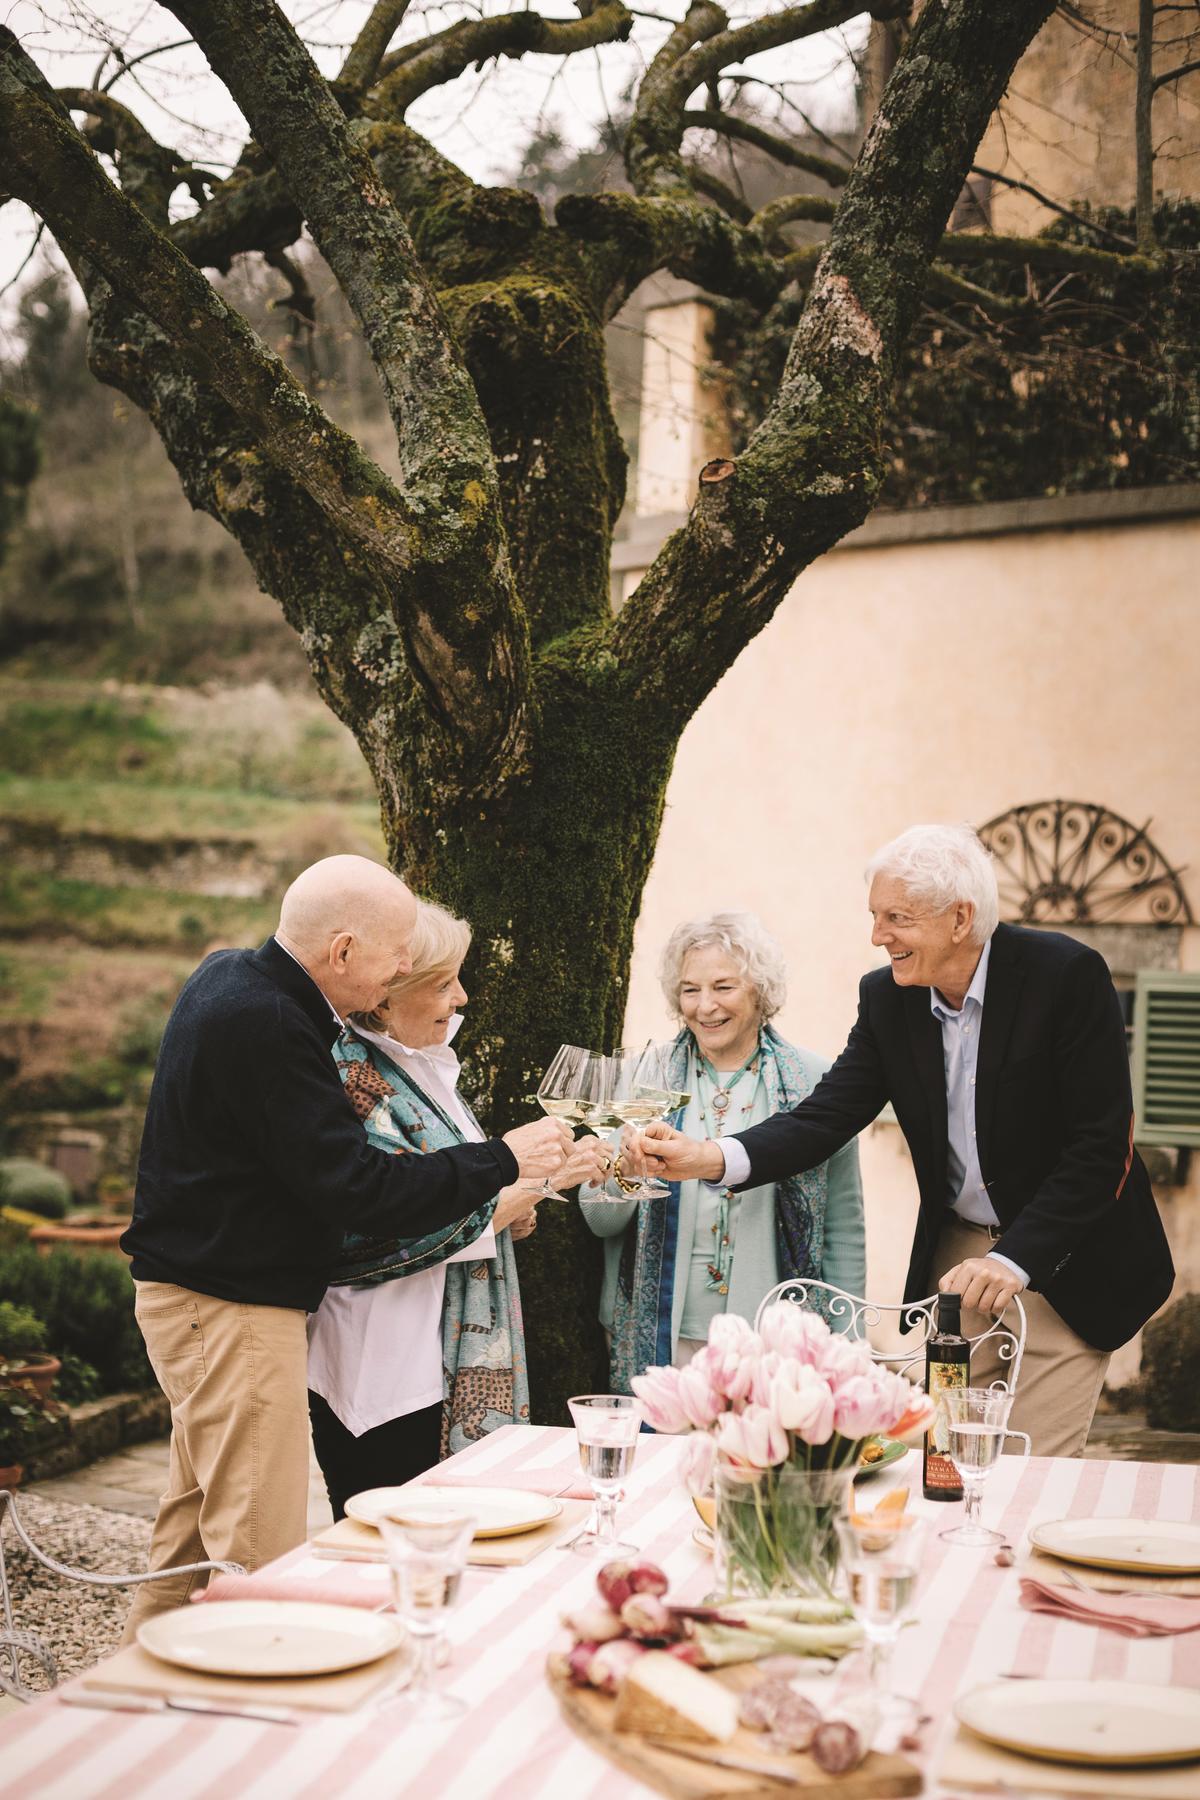 Gravely and her husband, Bill (L), toast with their friends and kindred spirits Frances and Ed Mayes. (Infraordinario Photo)